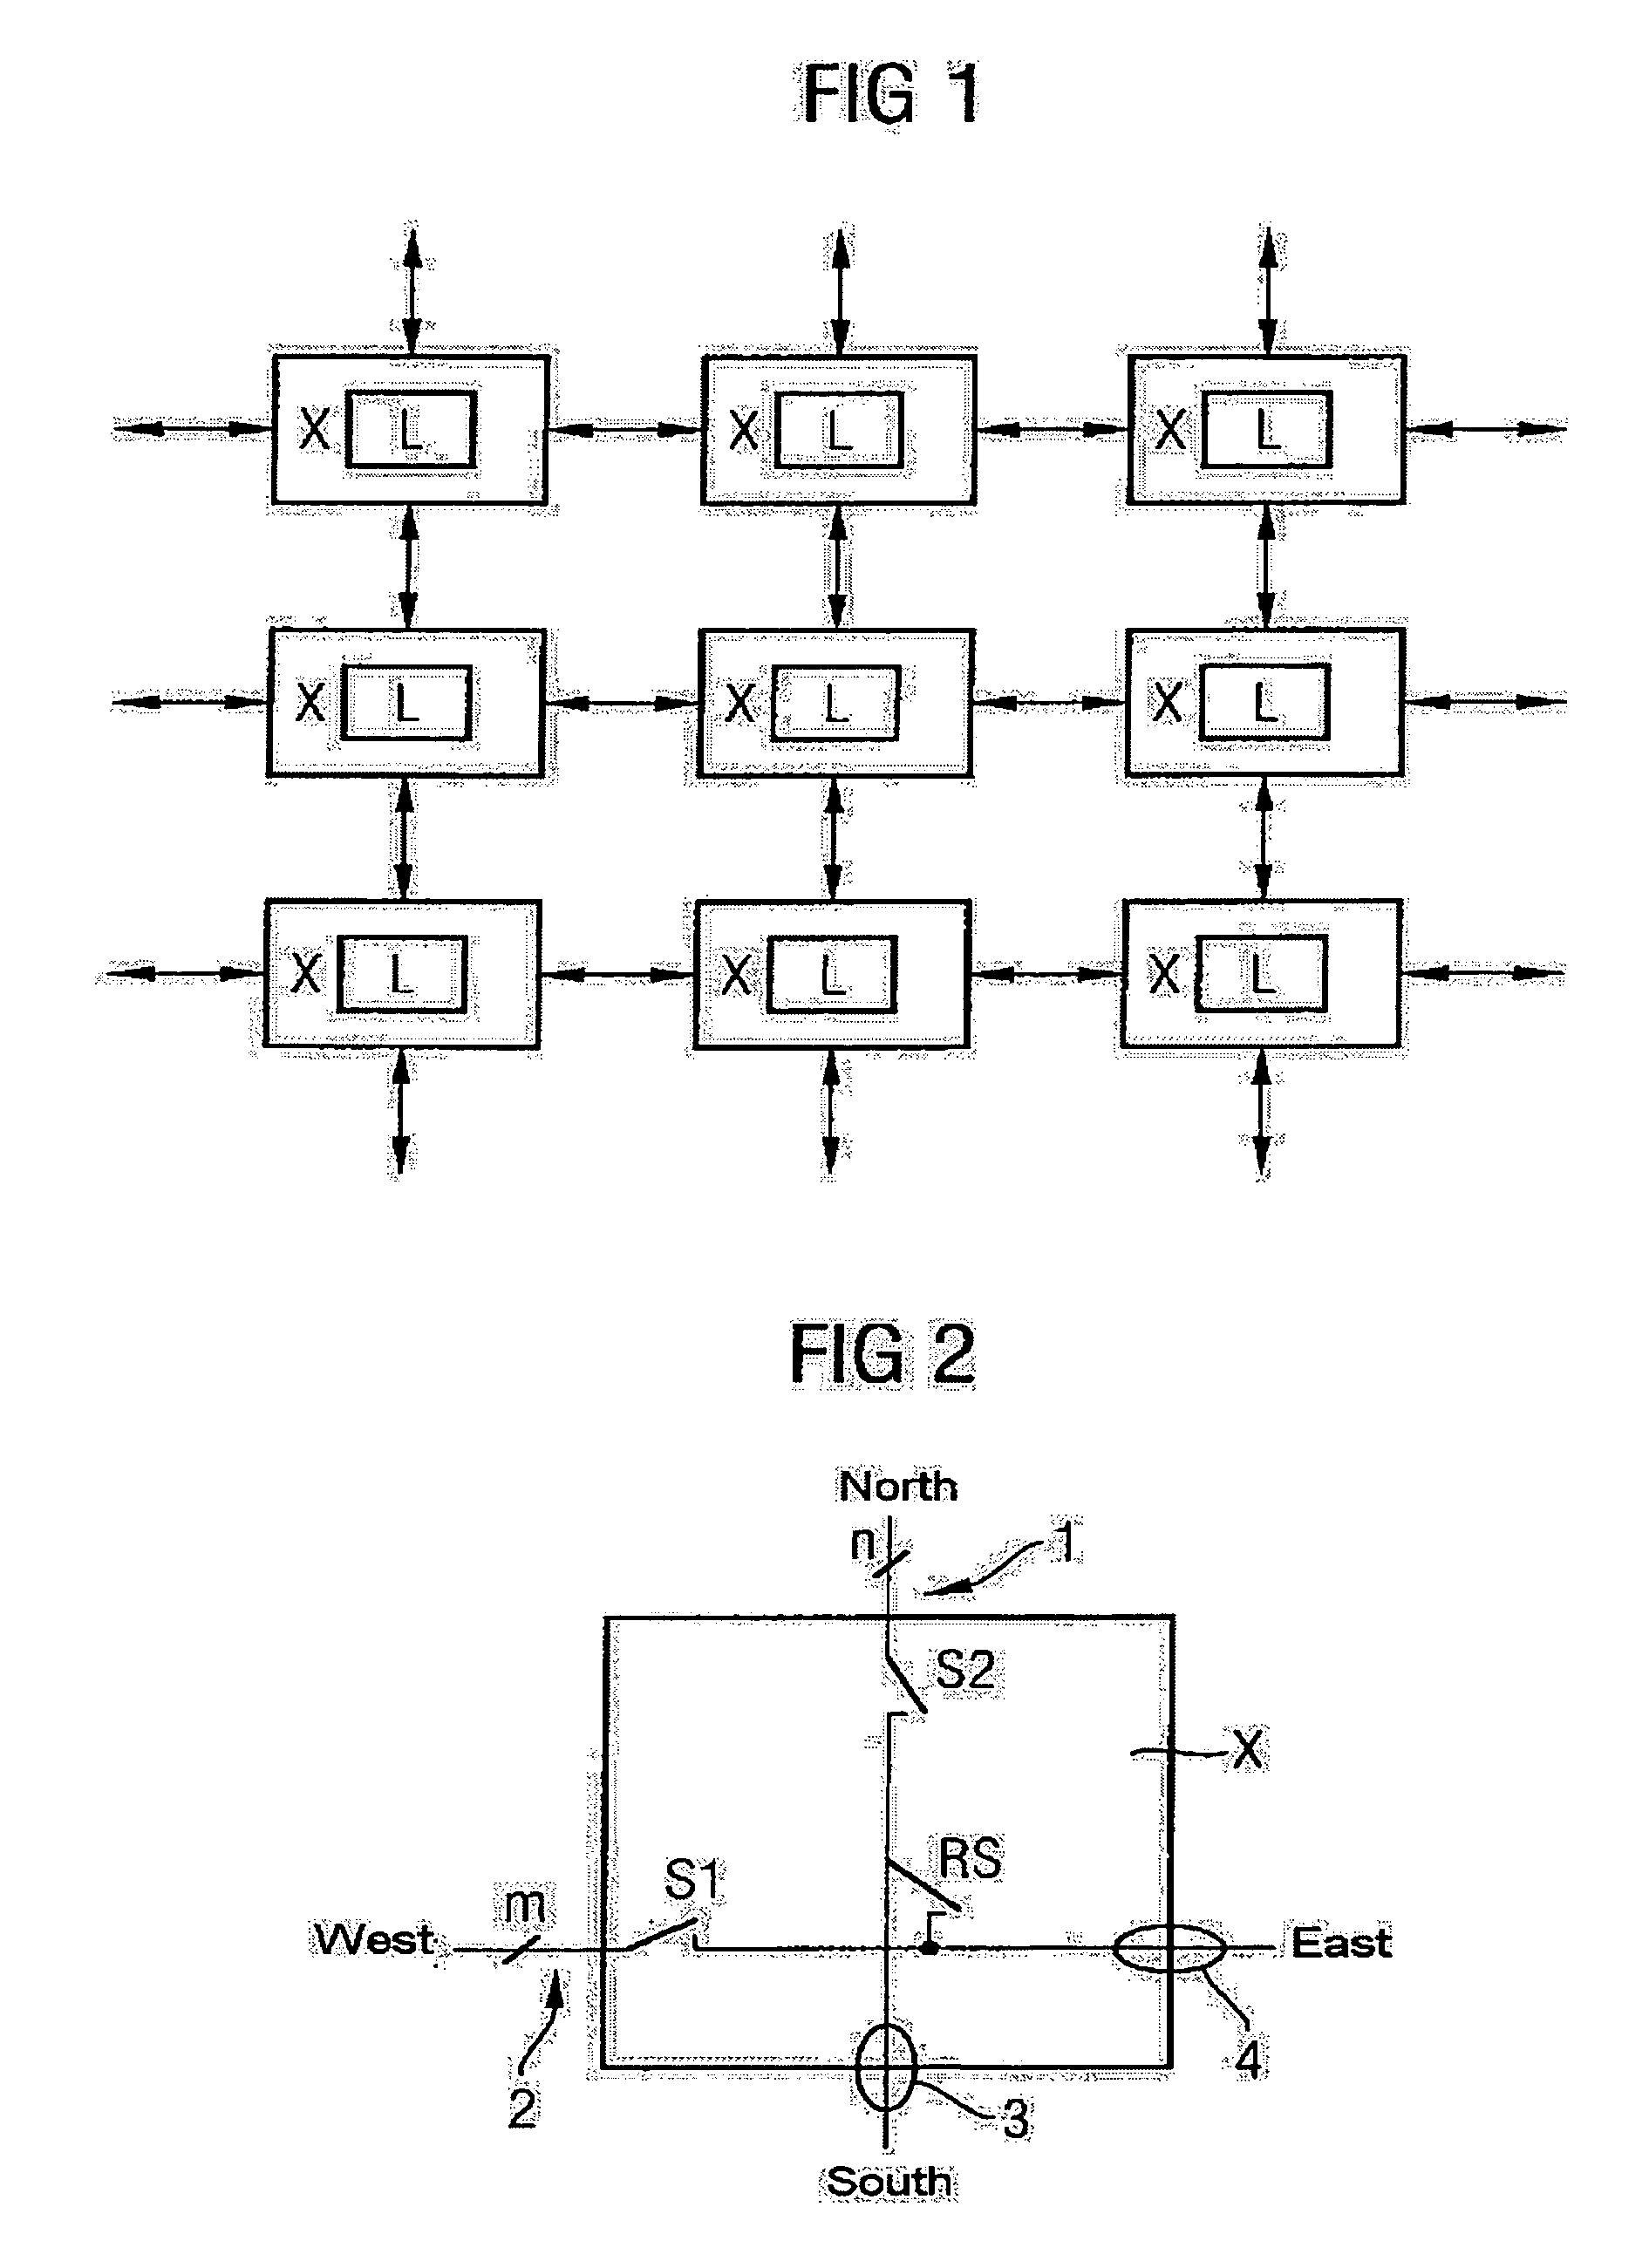 Architecture of function blocks and wirings in a structured ASIC and configurable driver cell of a logic cell zone